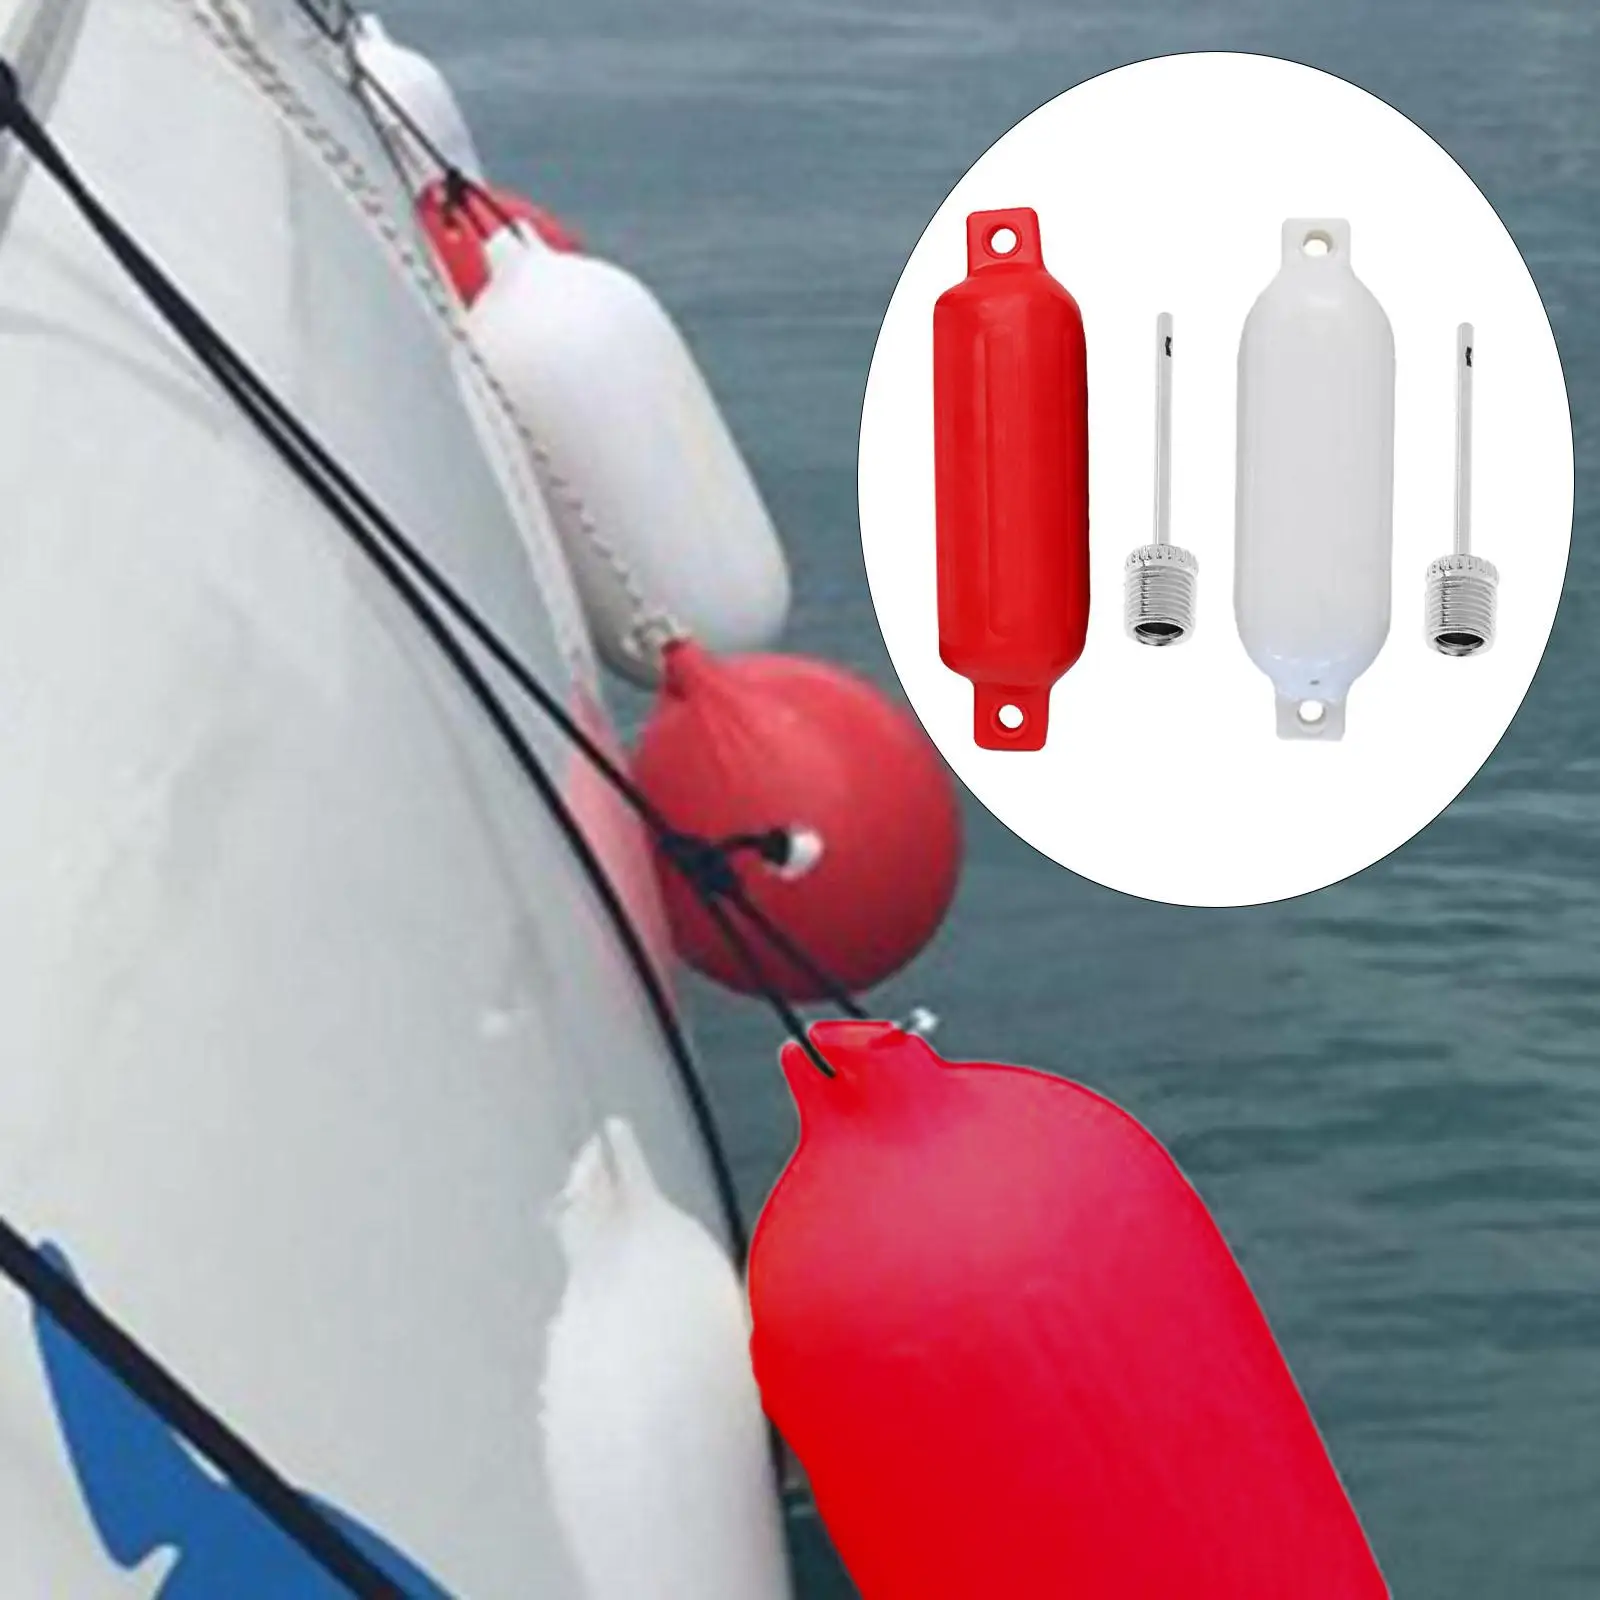 Marine Boat, Boat Bumpers Protection Come with Boat Bumpers for Fishing Boats Sailboats Pontoon